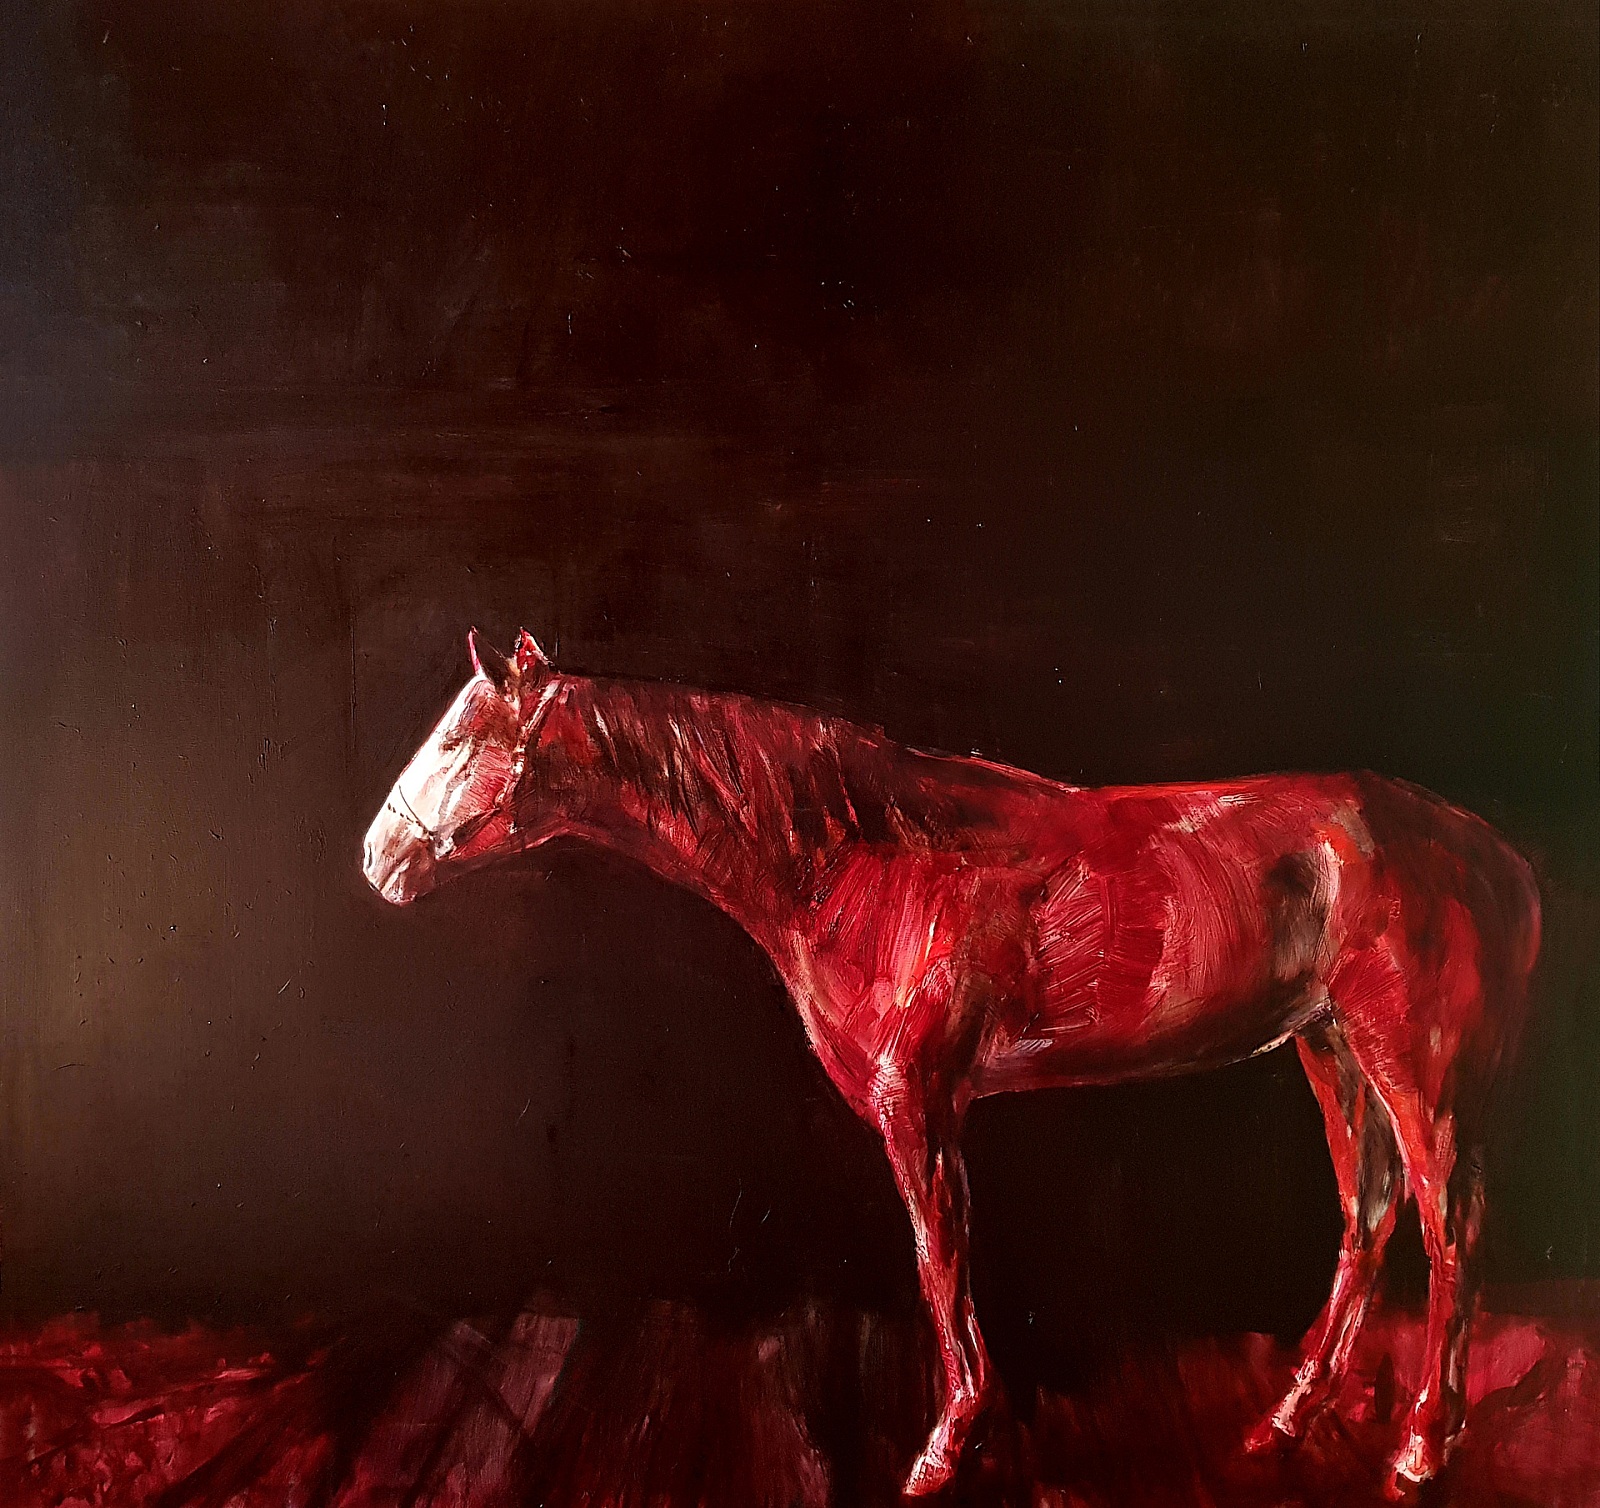 Deep Red Horse - 2018, oil on canvas, 180 x 190 cm, private collection, Italy - 4